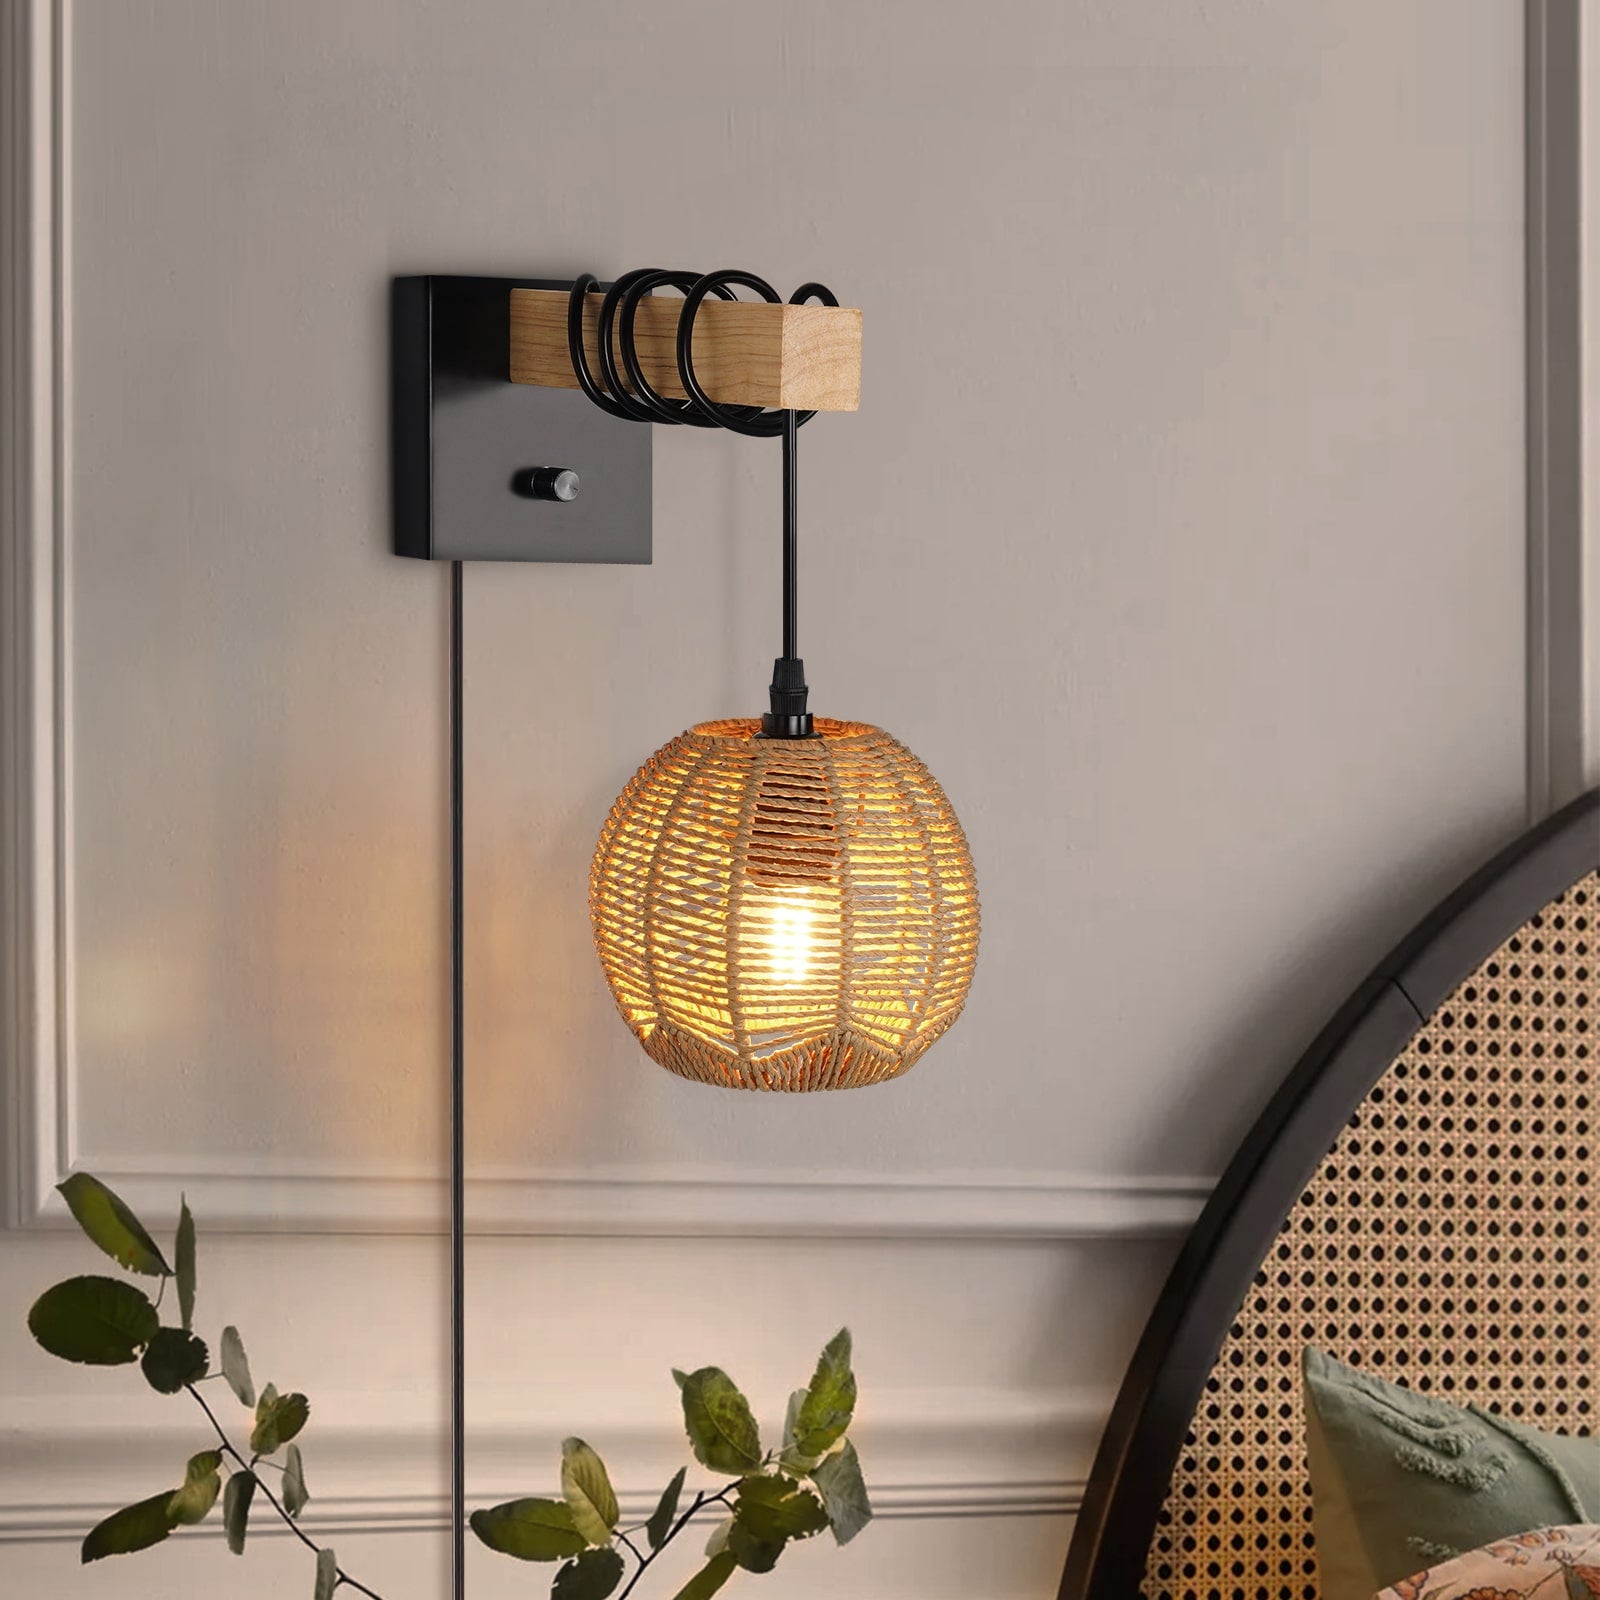 N01 Rattan Wall Sconce Lamp Dimmable Boho with Hand-woven Shade